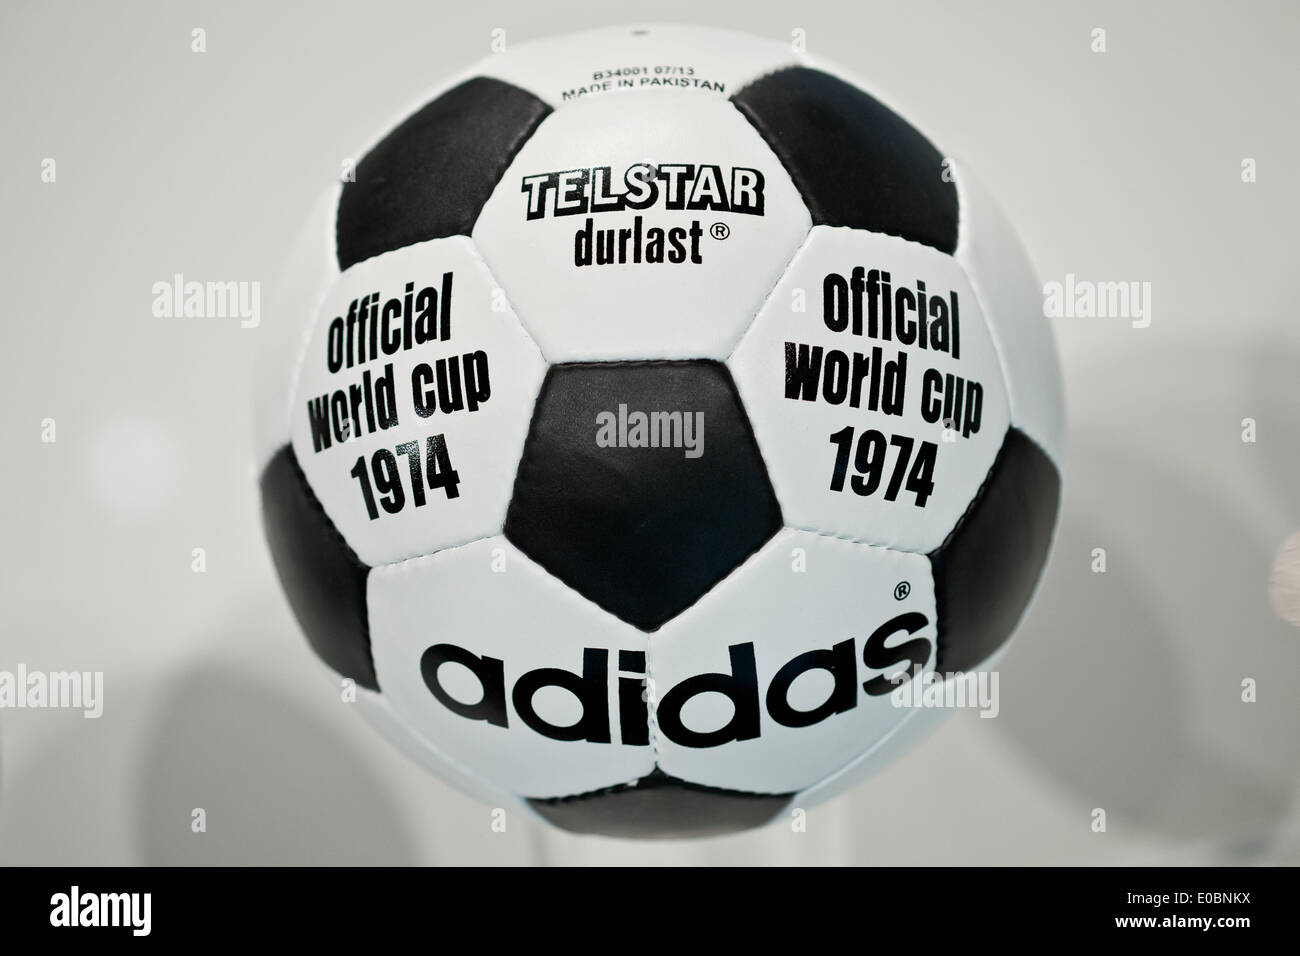 Fuerth, Germany. 08th May, 2014. The 'Telstar Durlast' soccer ball which  was the official ball of the 1974 soccer world cup in Germany is pictured  during the general meeting of sporting goods